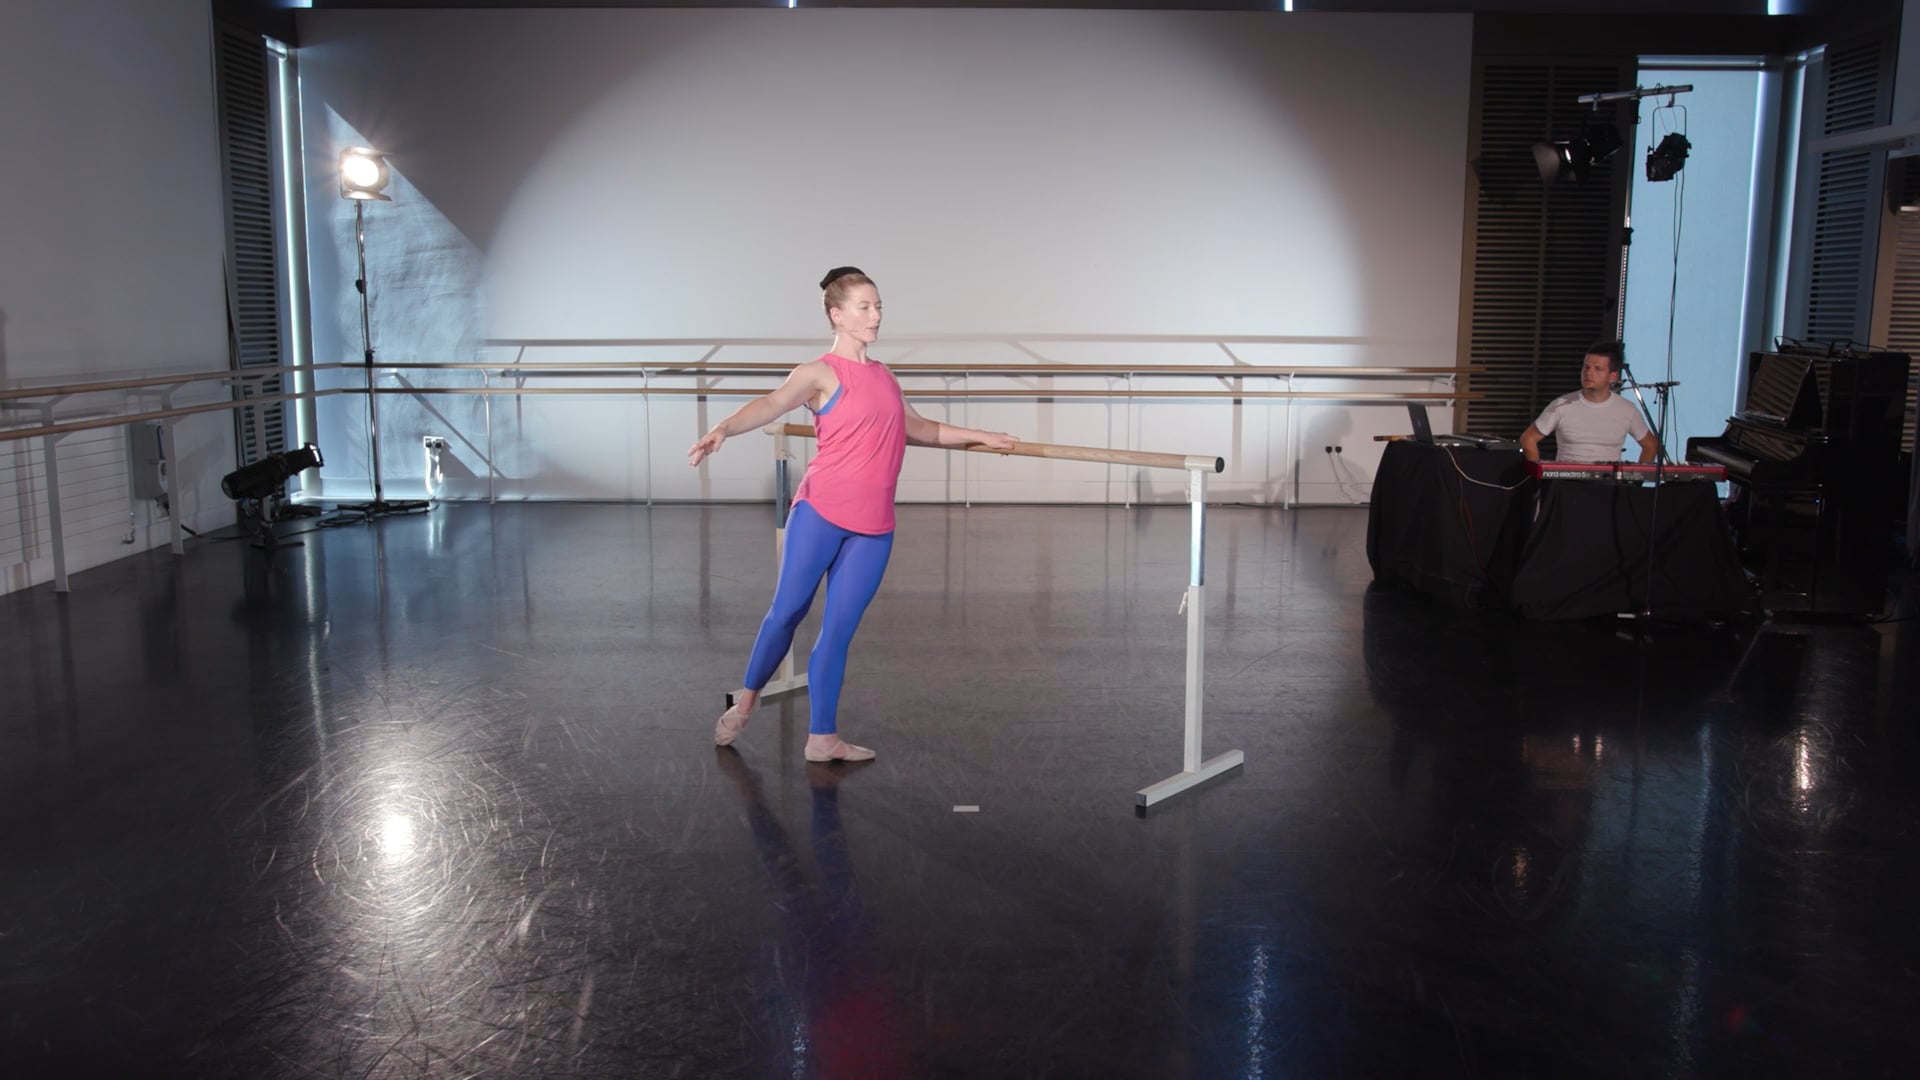 a young girl is practicing ballet in a studio.